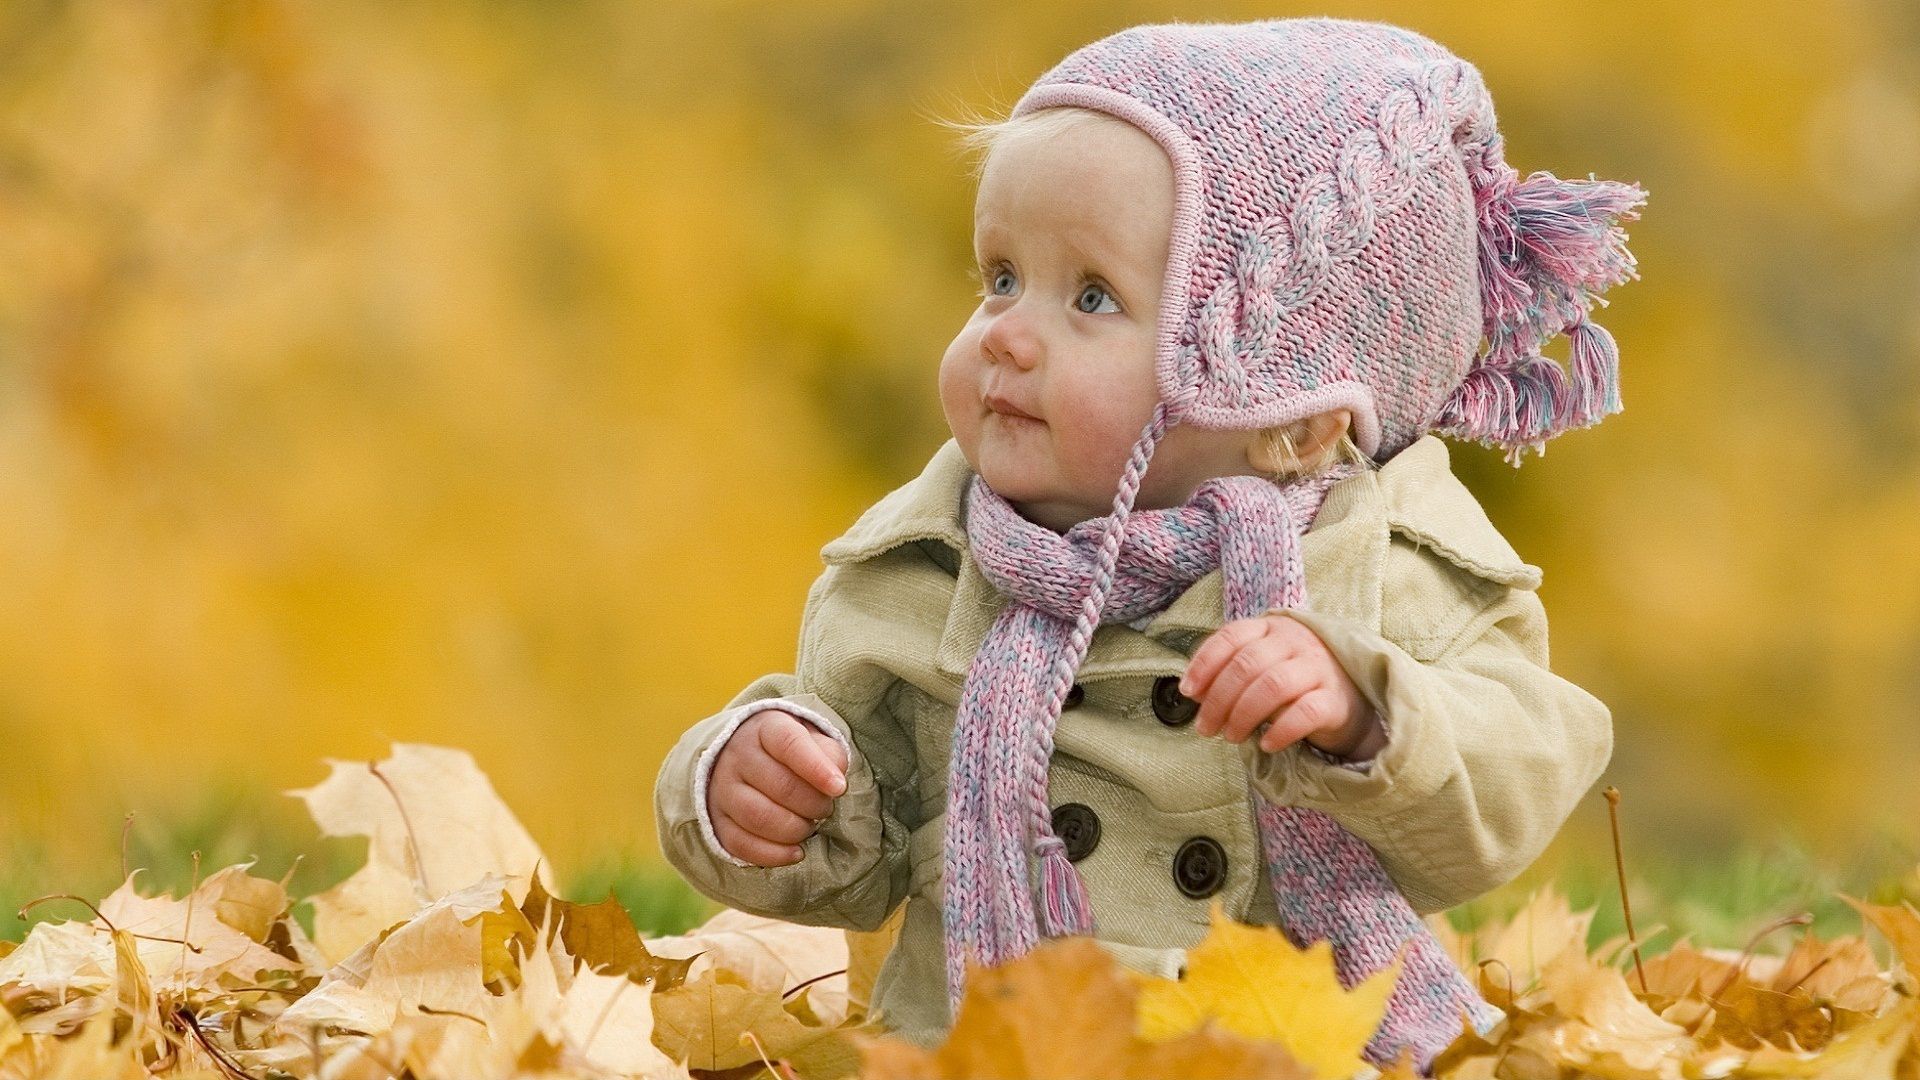 Lovely small baby beautiful wallpapers - New hd wallpaperNew hd